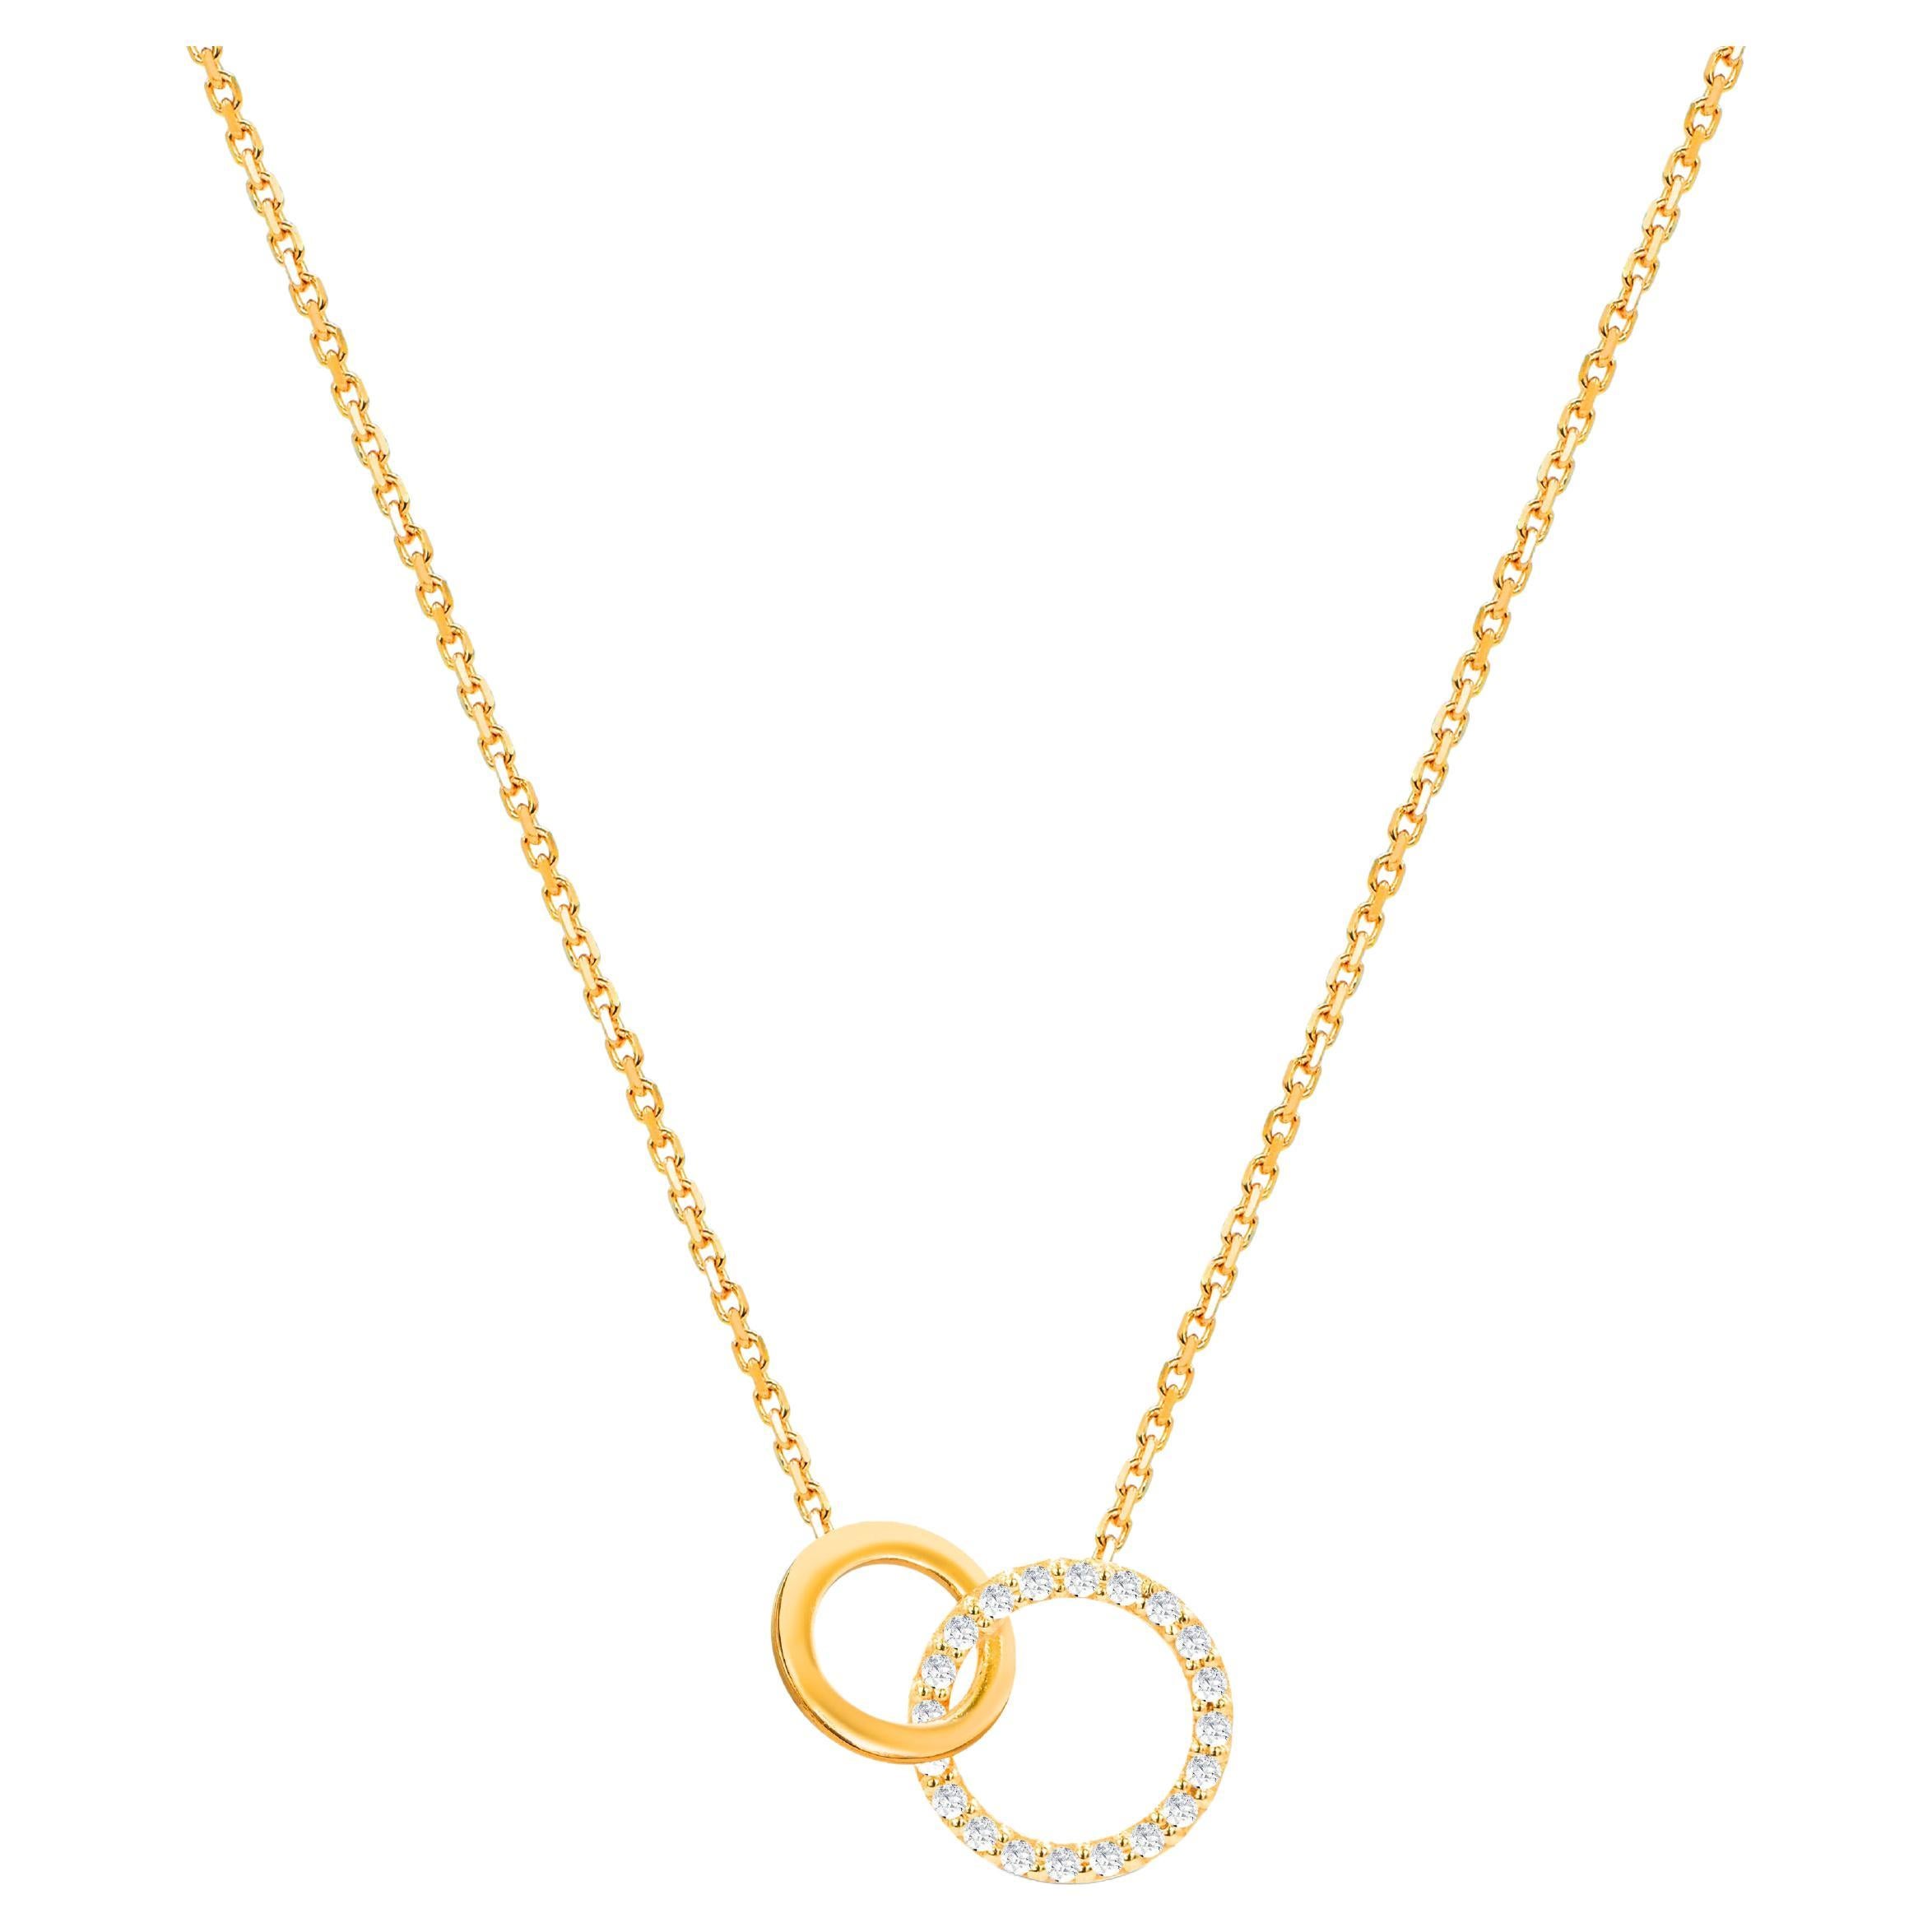 0.13 Ct Diamond Interlocking Rings Necklace in 14K Gold For Sale